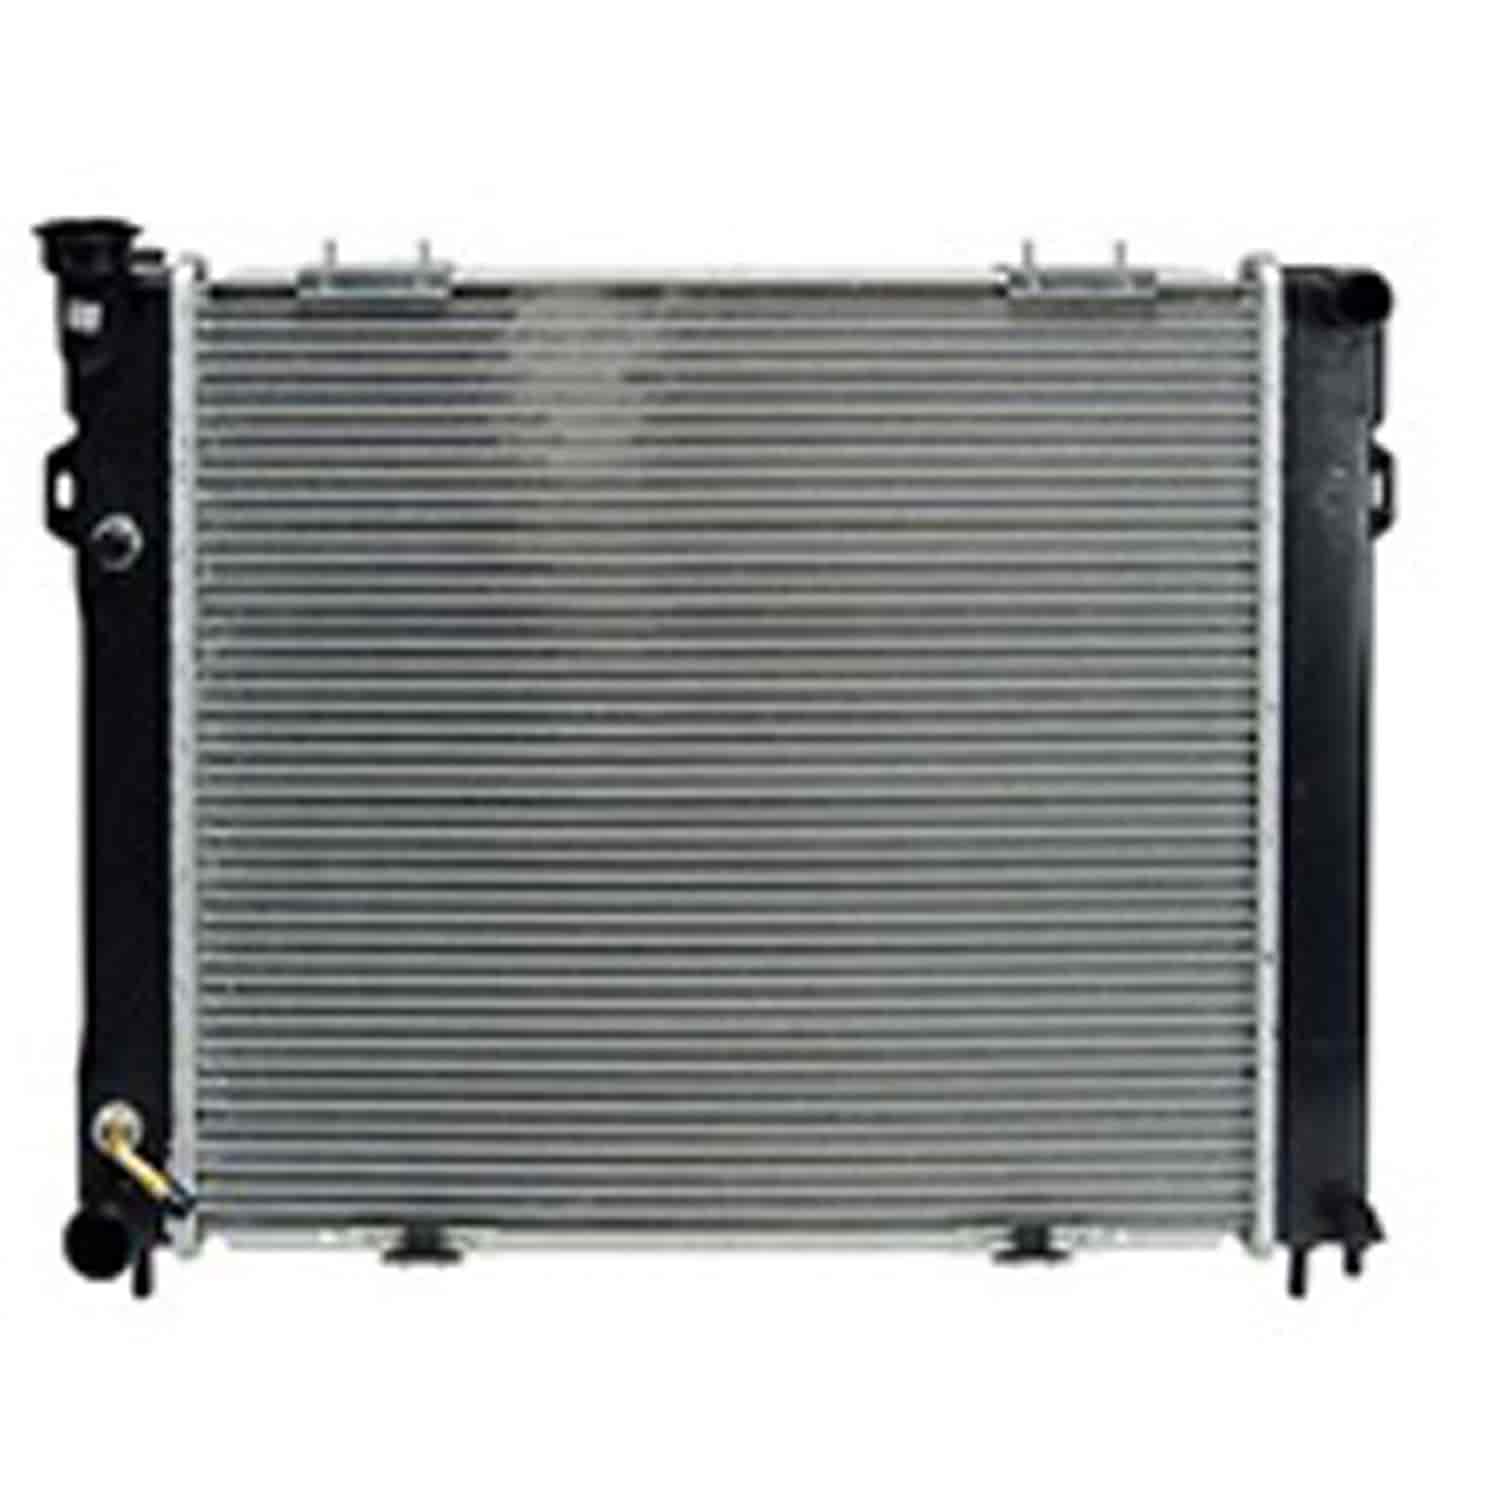 This 1 row heavy duty radiator from Omix-ADA fits 93-97 Grand Cherokee 4.0L with or without AC manual or automatic transmission.